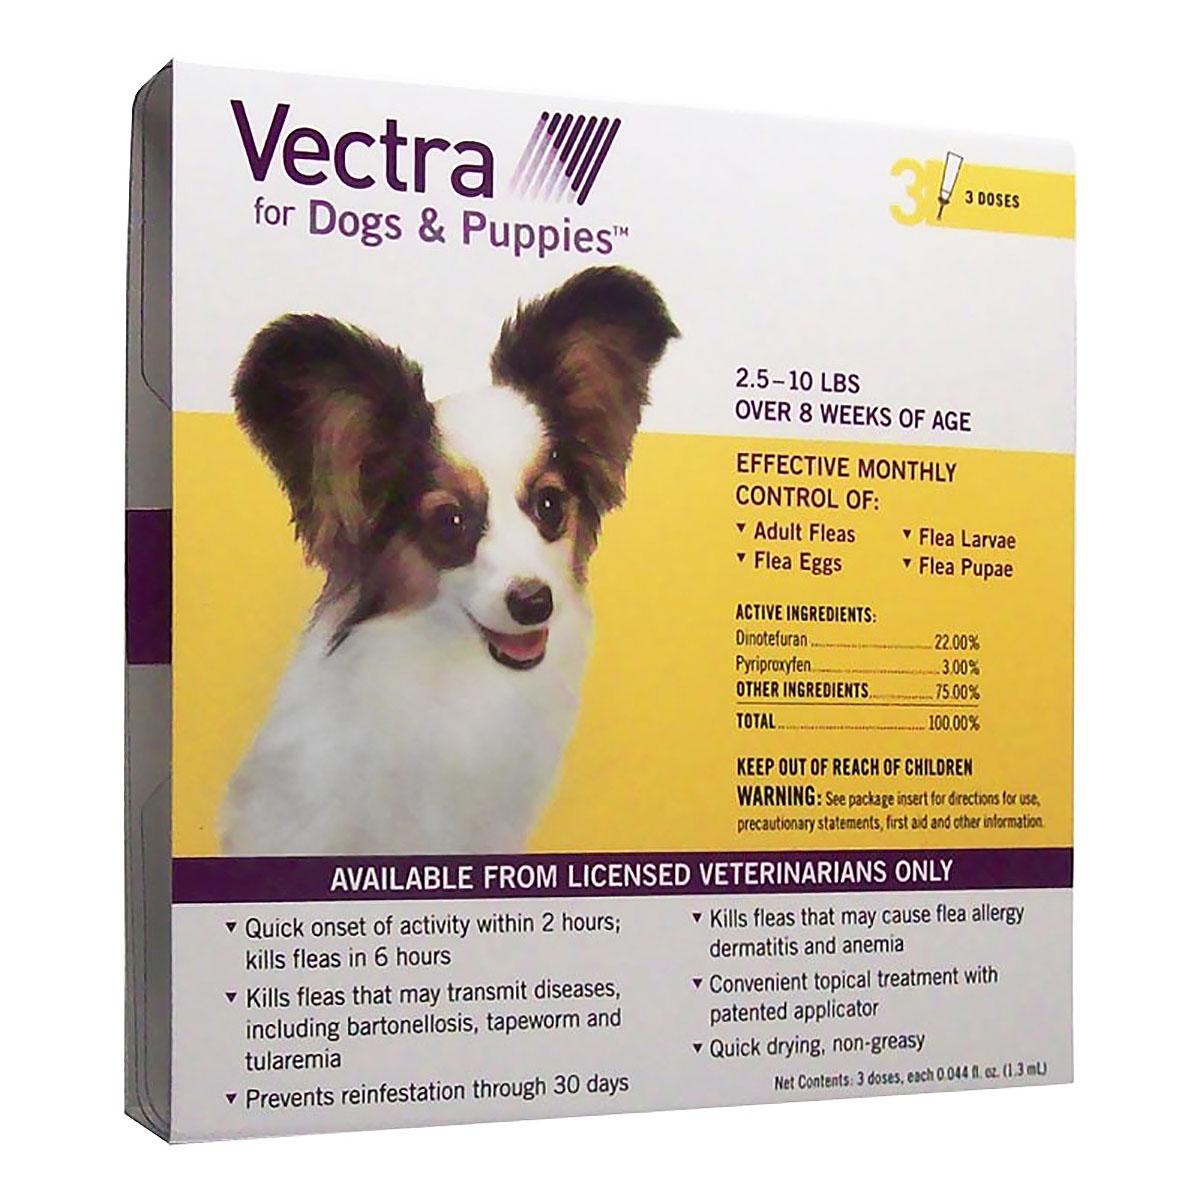 Vectra Topical Flea Treatment for Dogs and Puppies - 3 Doses